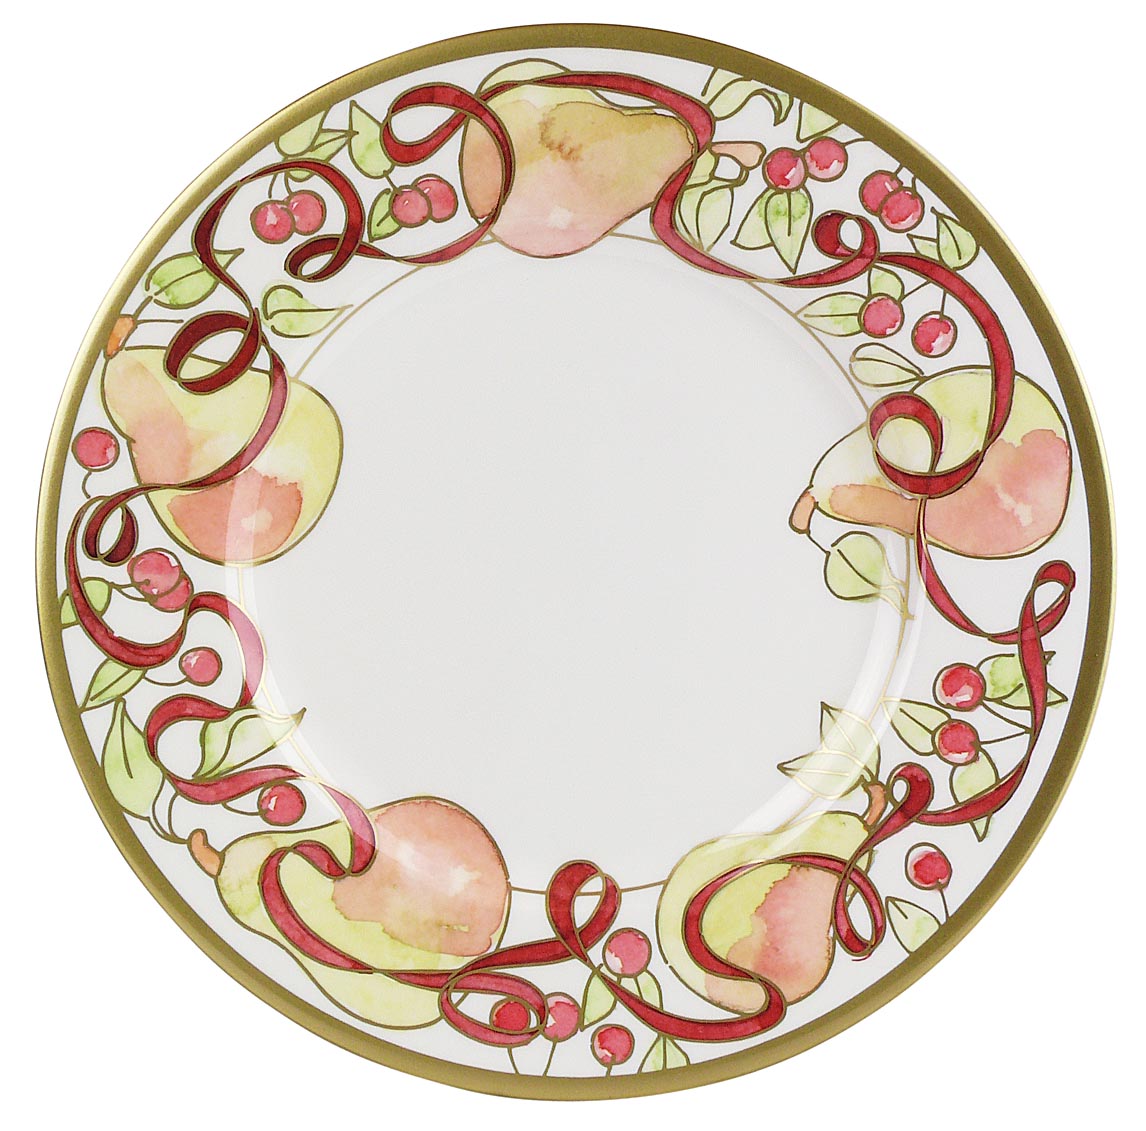 7.5 In. Berries, Pears Holiday Dessert & Salad Plate, Pack Of 24